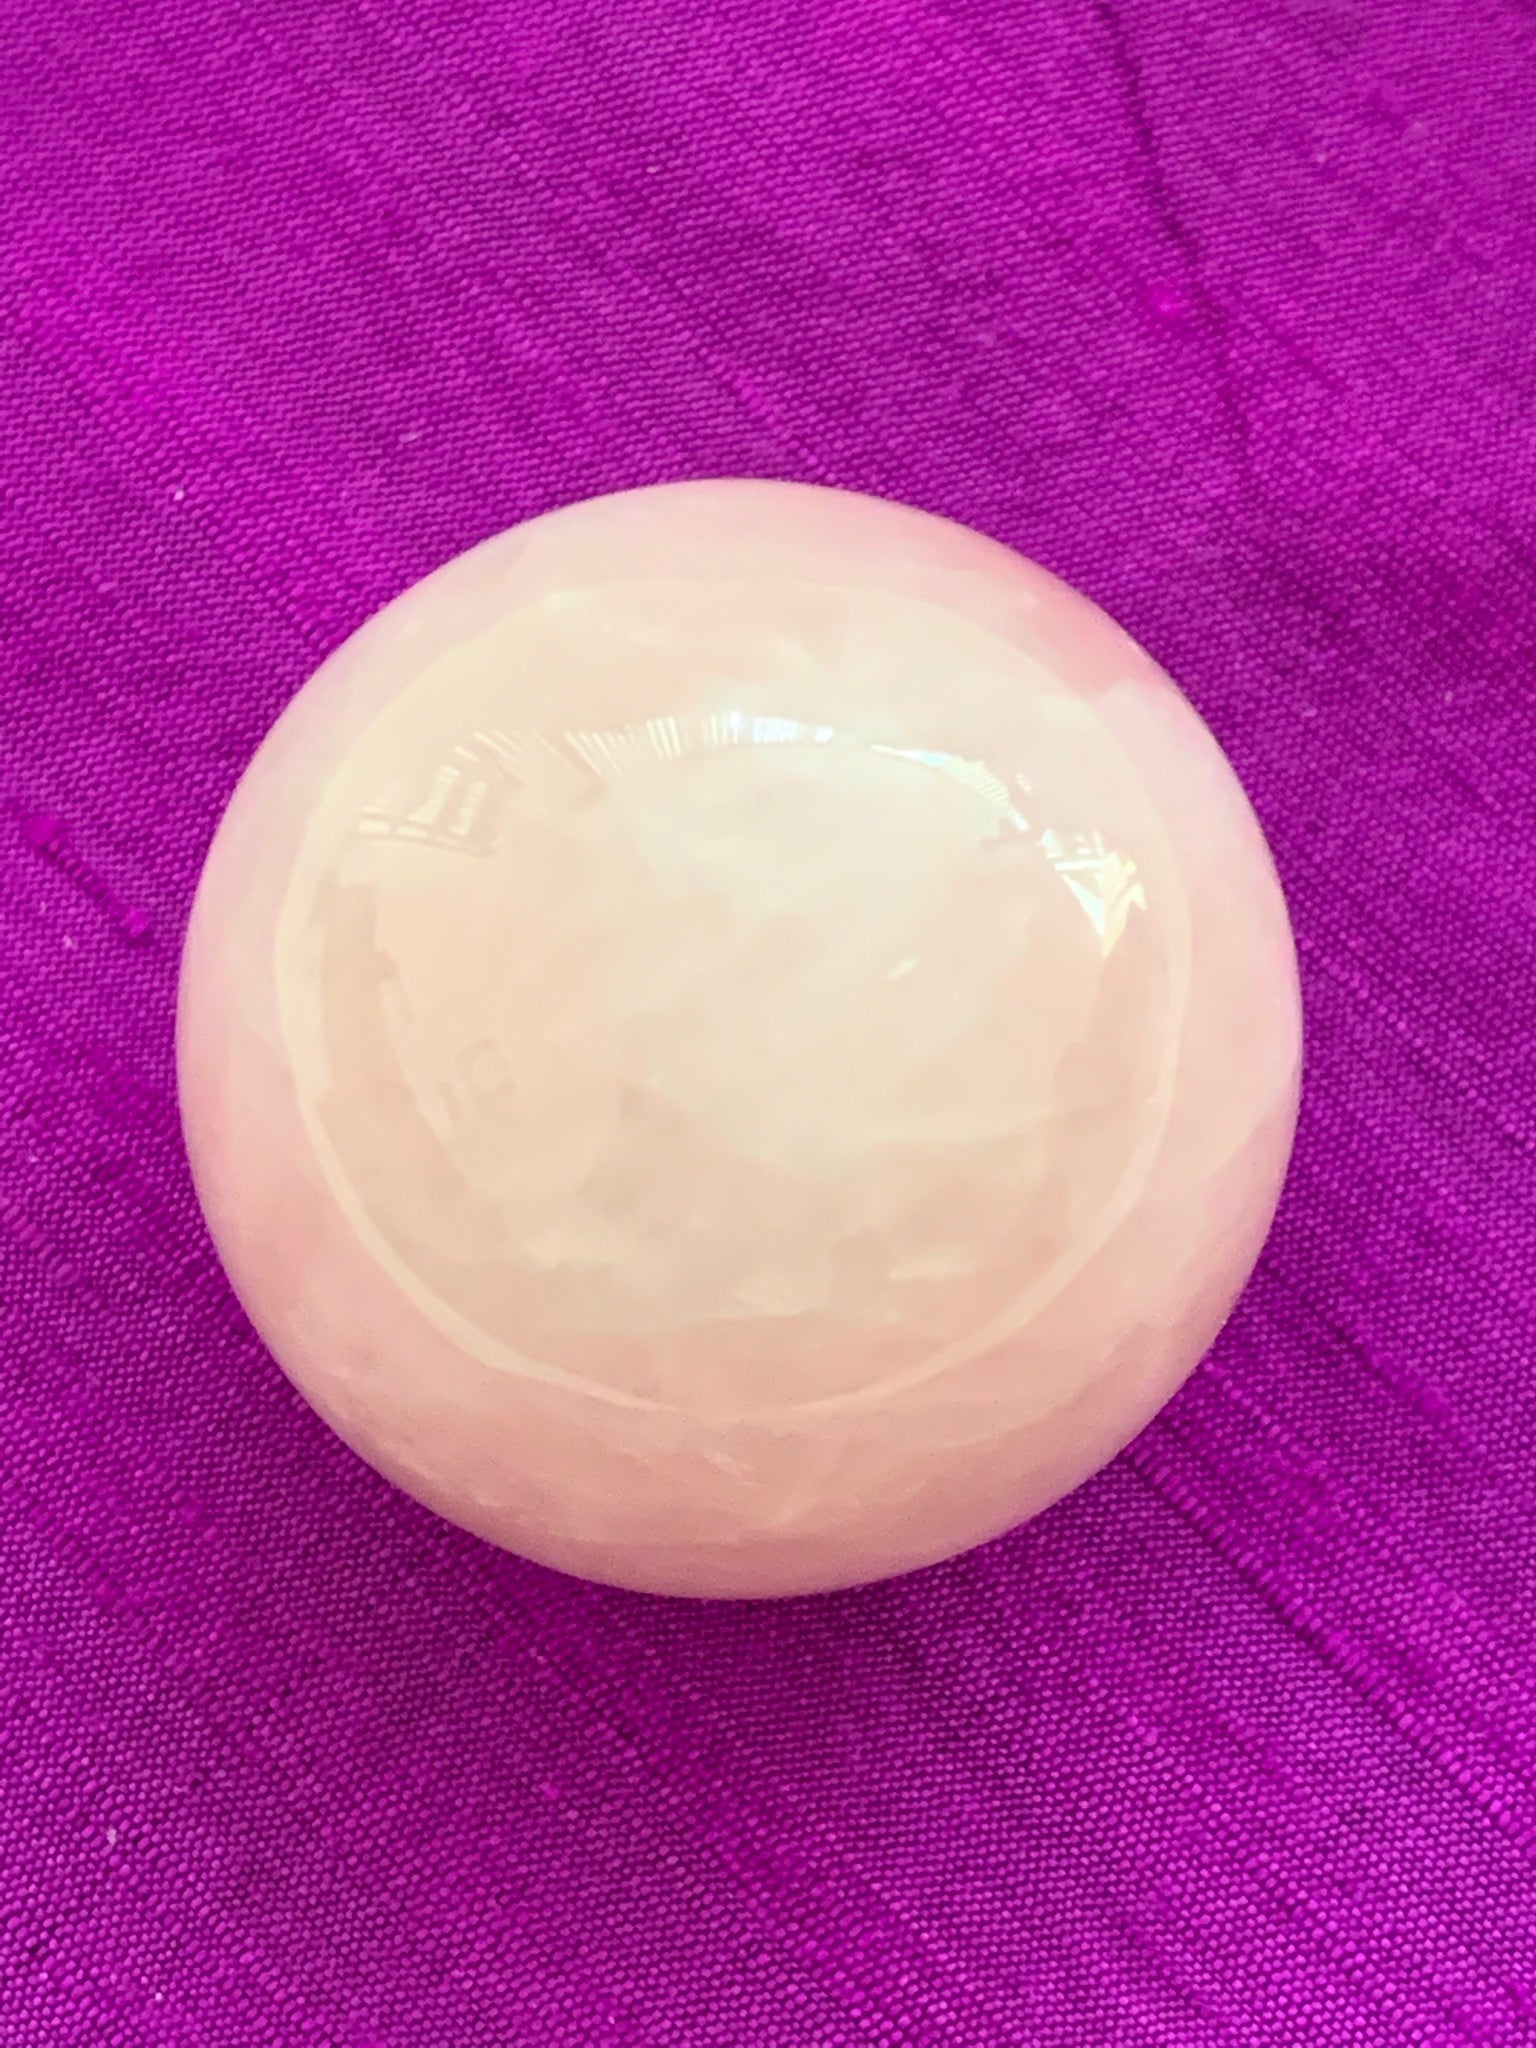 Close-up view without stand. High quality Rose Quartz sphere is perfect for your altar, meditation space or to hold while meditating, or anywhere you want to radiate the energy of love ♥. Rose quartz is the "stone of unconditional love & infinite peace." It opens the heart and soothes emotional distress. Size is approximately 2"/40mm. Plastic stand as seen in photo, is included with your purchase.